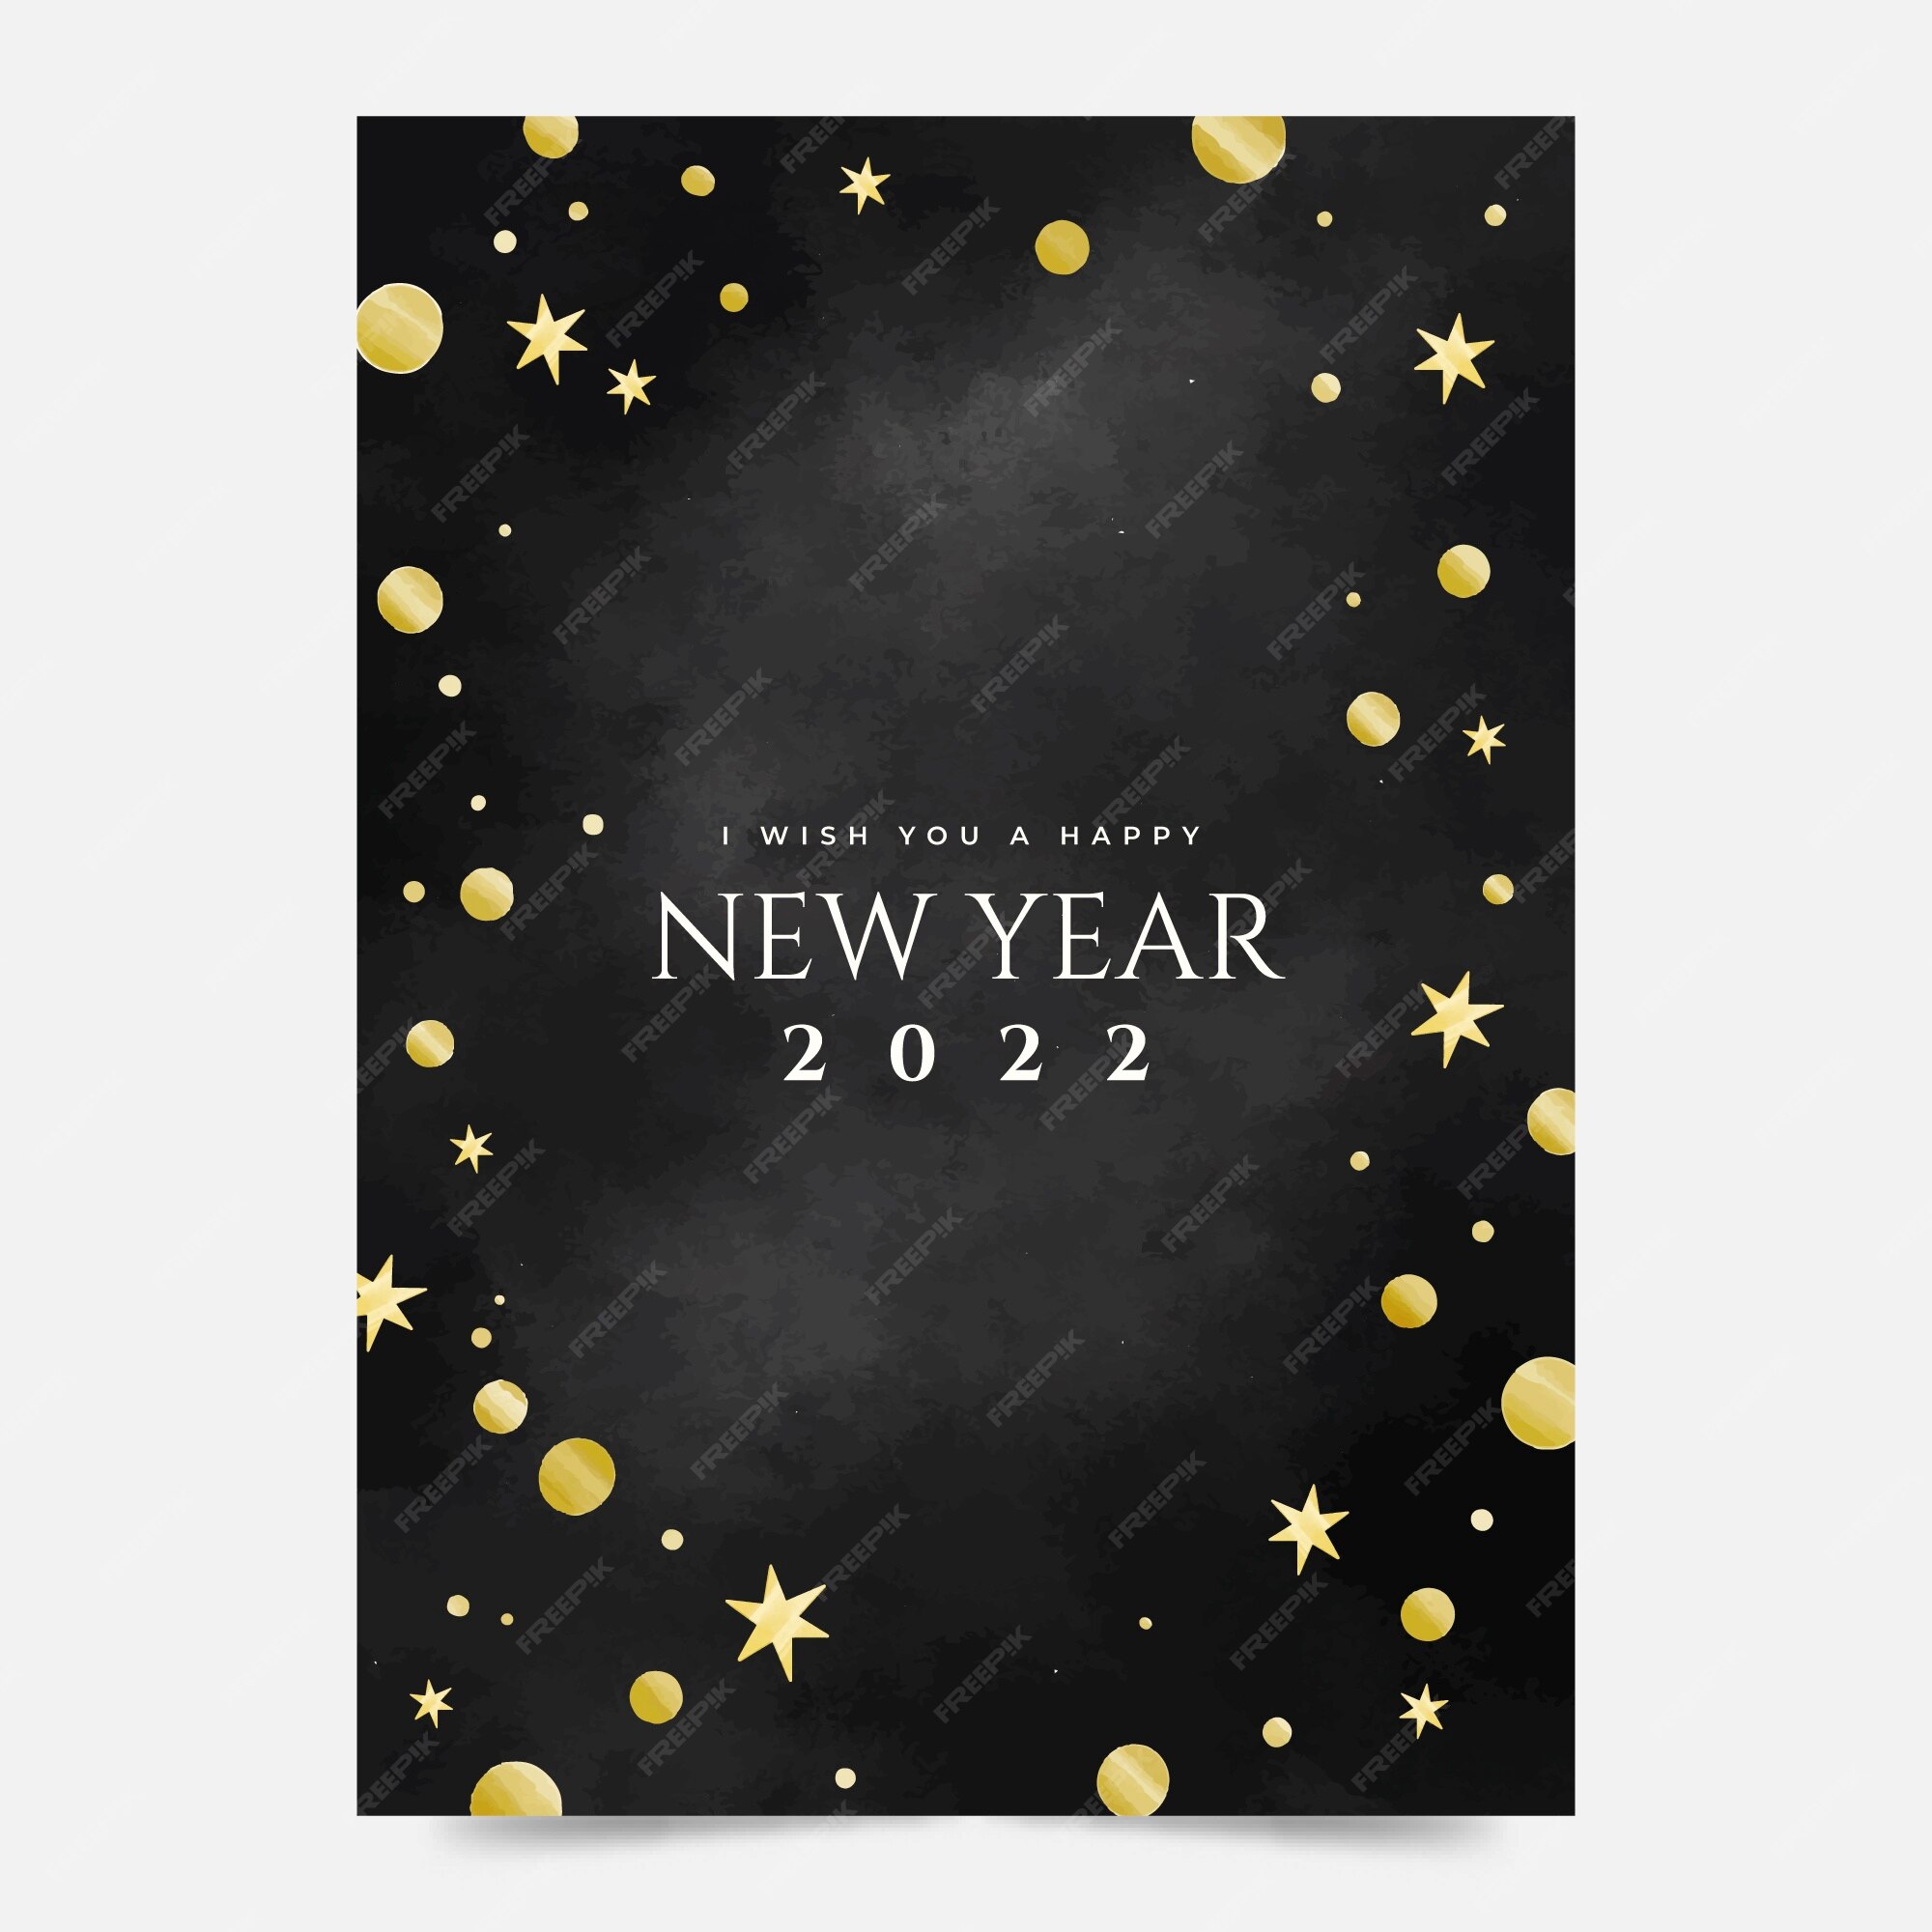 free-vector-watercolor-new-year-greeting-card-template